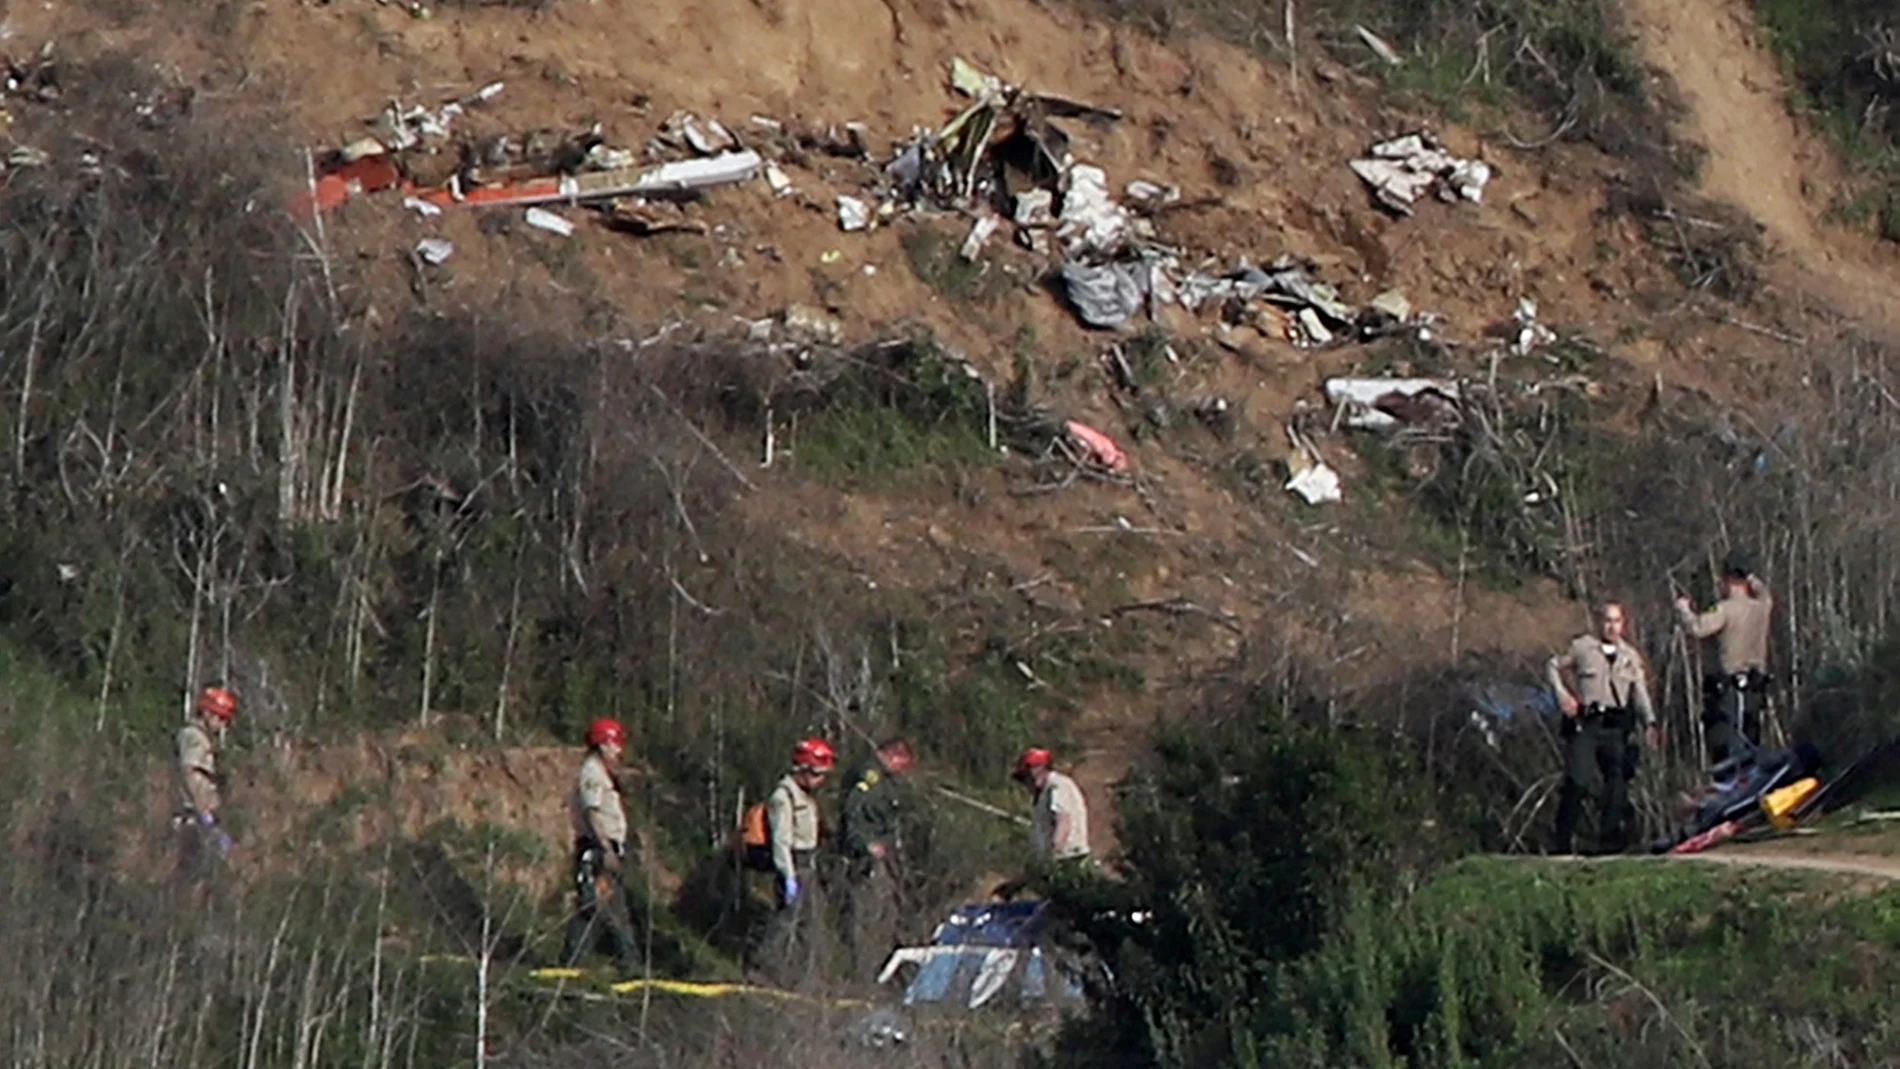 Sheriffs and officials investigate the helicopter crash site of NBA star Kobe Bryant in Calabasas, California